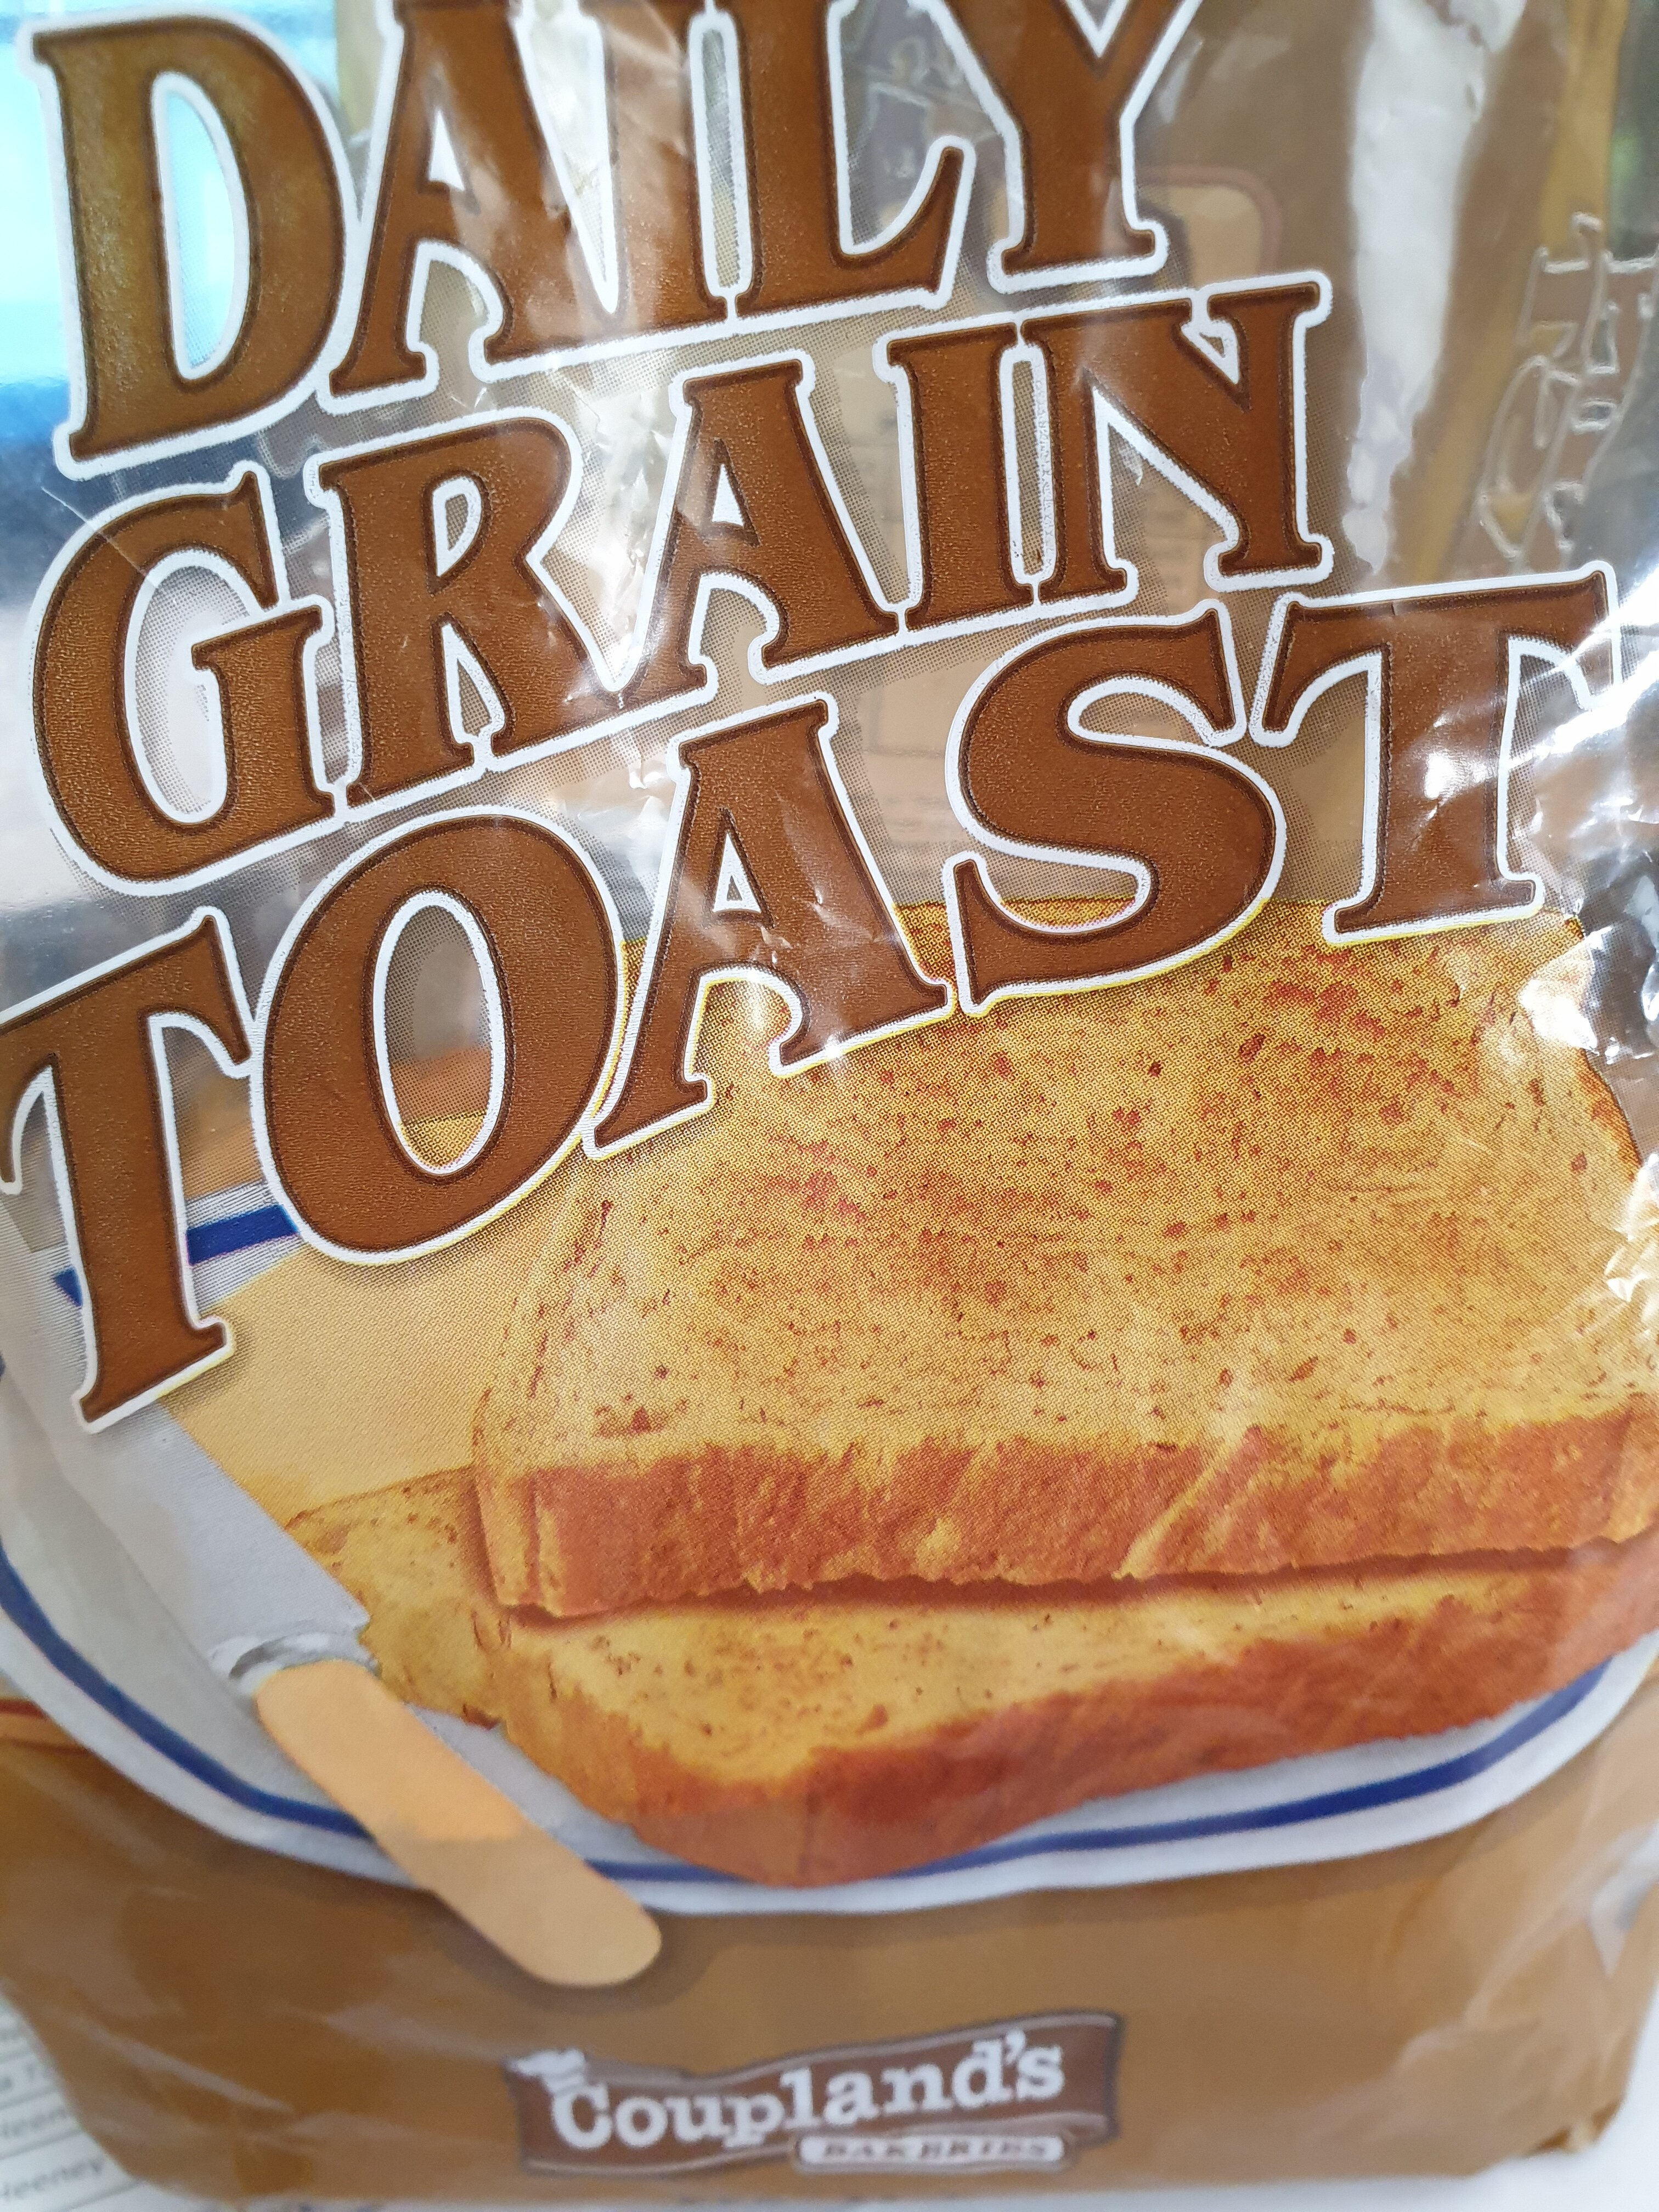 Couplands daily grain toast - Product